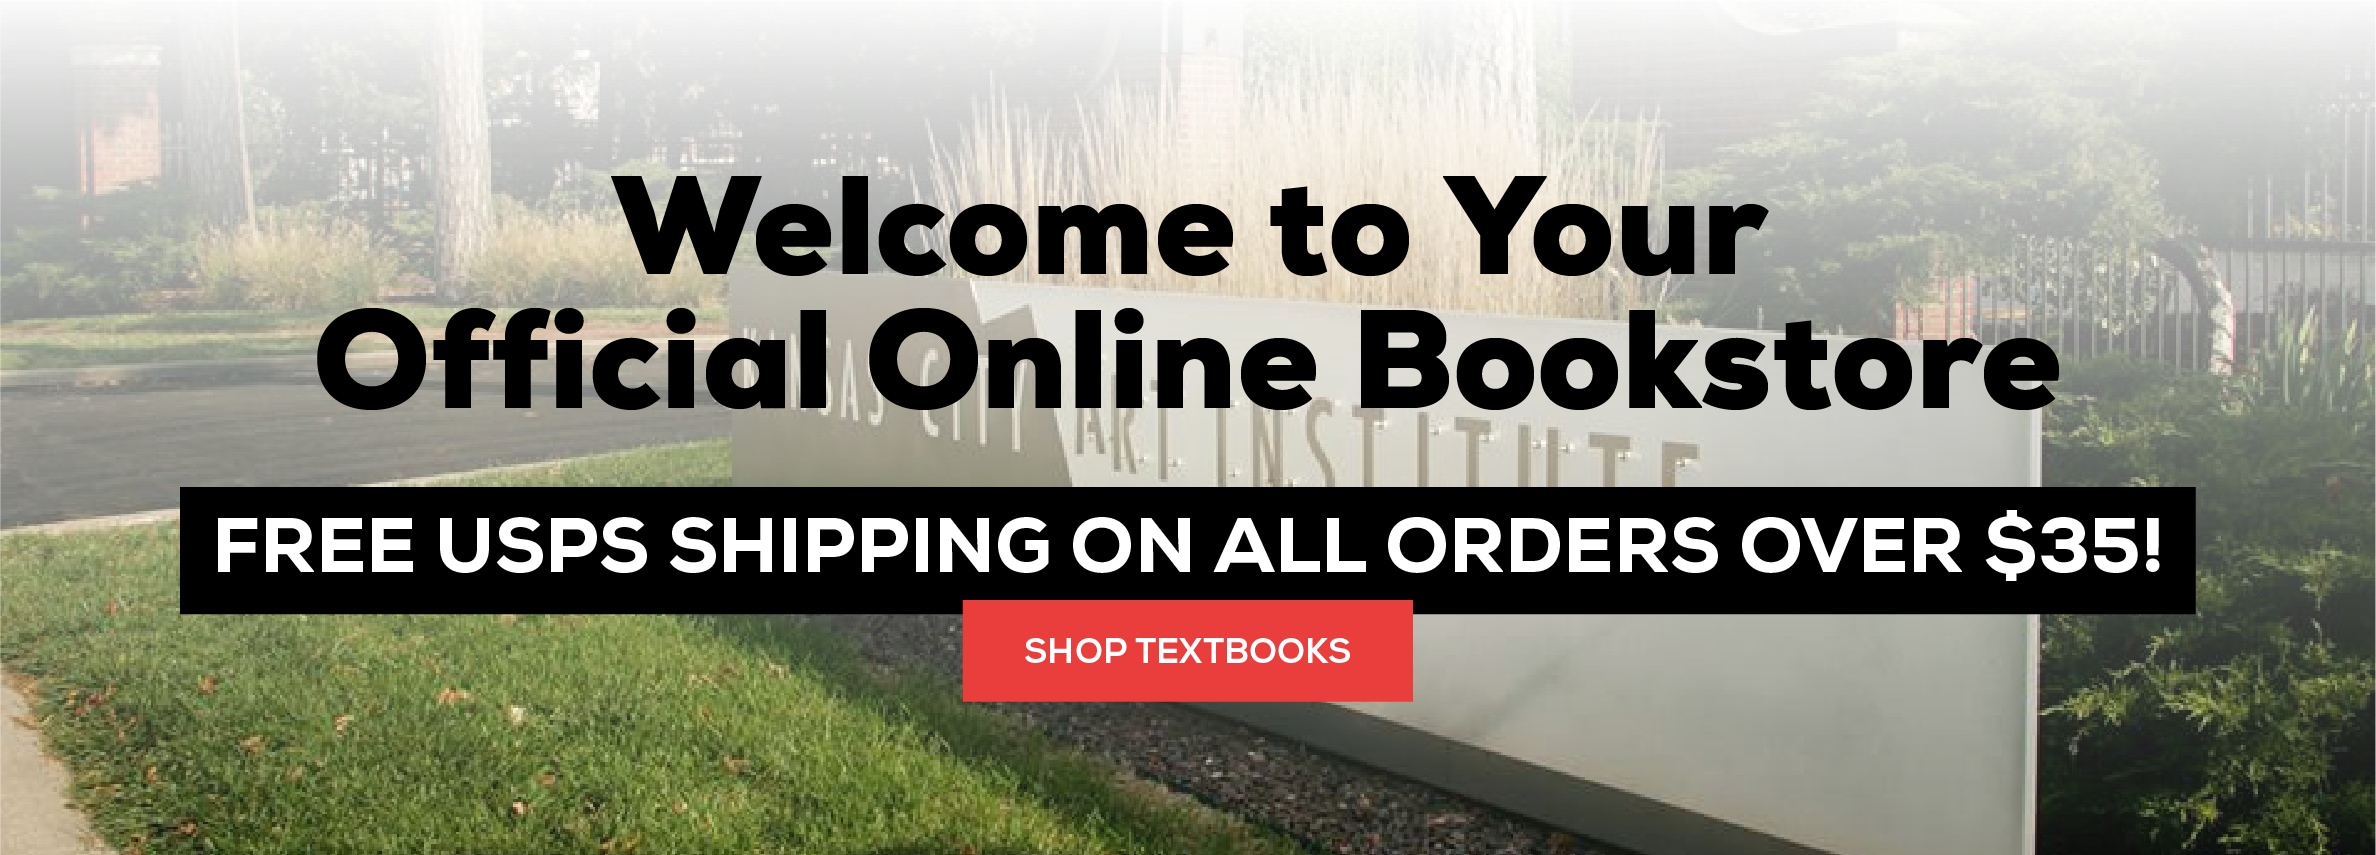 Welcome to your online bookstore